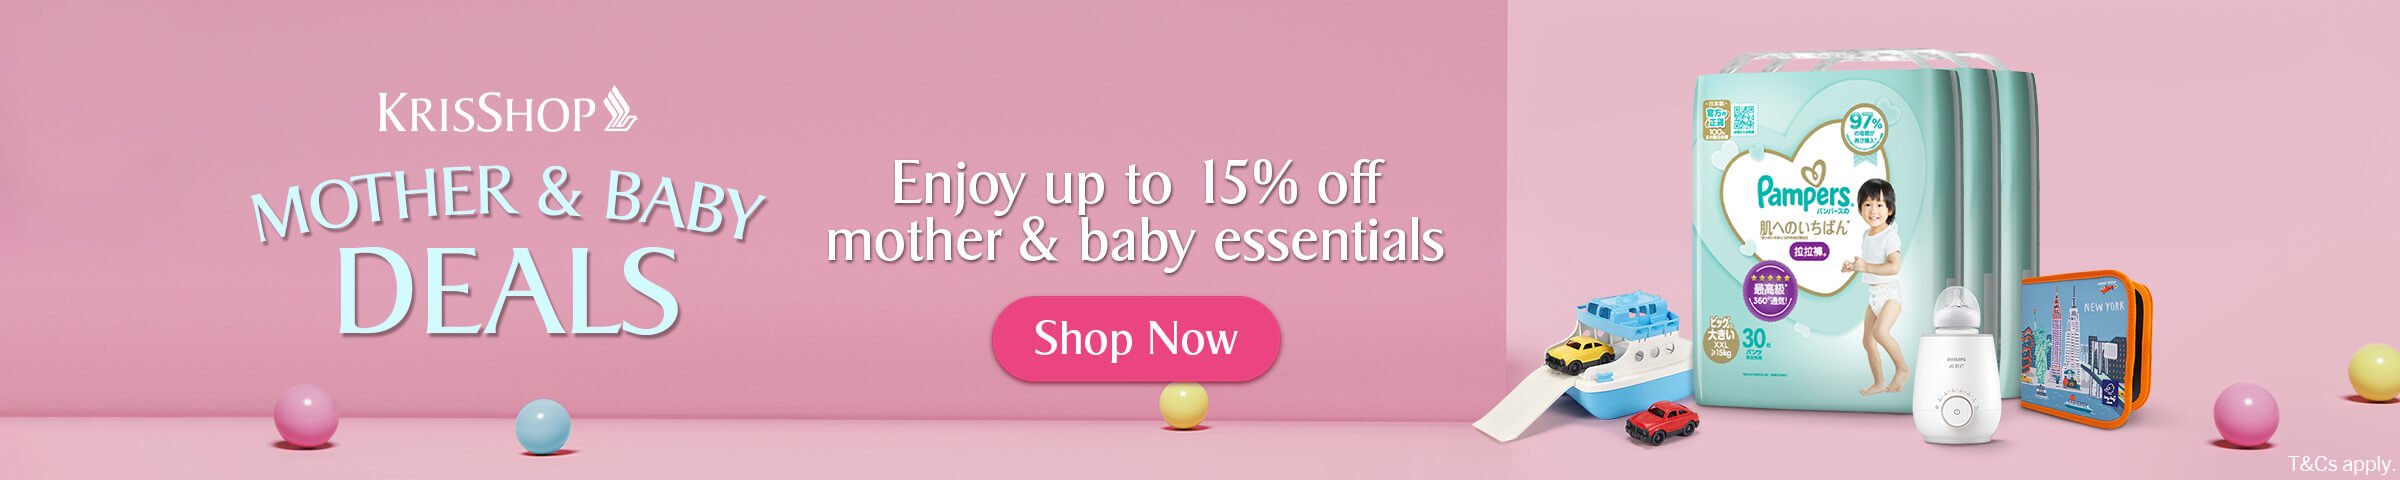 KrisShop Mother's & Baby Deals - Up to 15% off